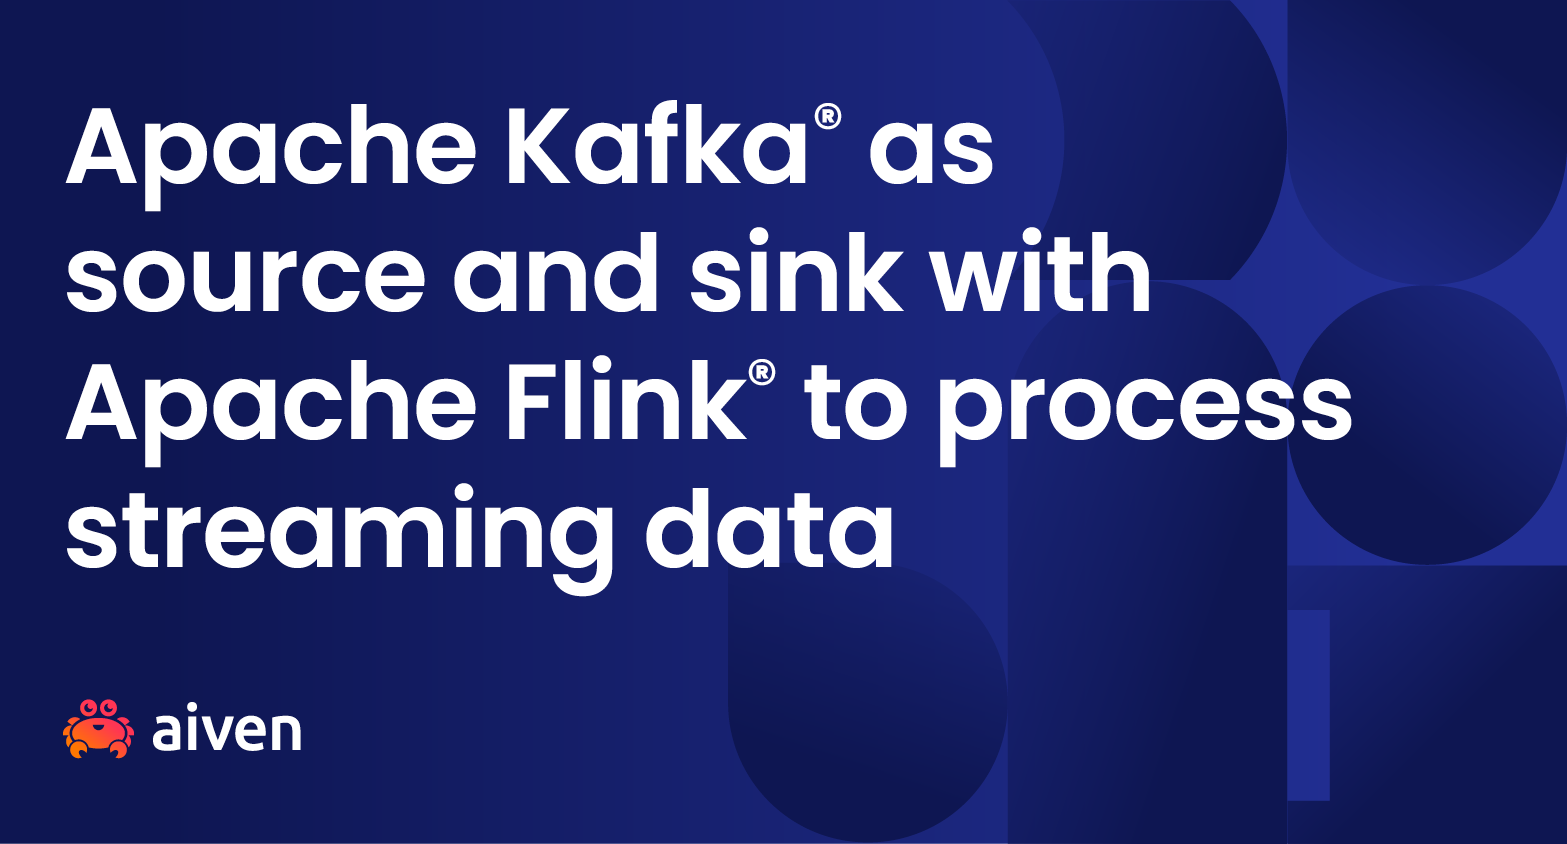 Apache Kafka® as source and sink with Apache Flink® to process streaming data illustration